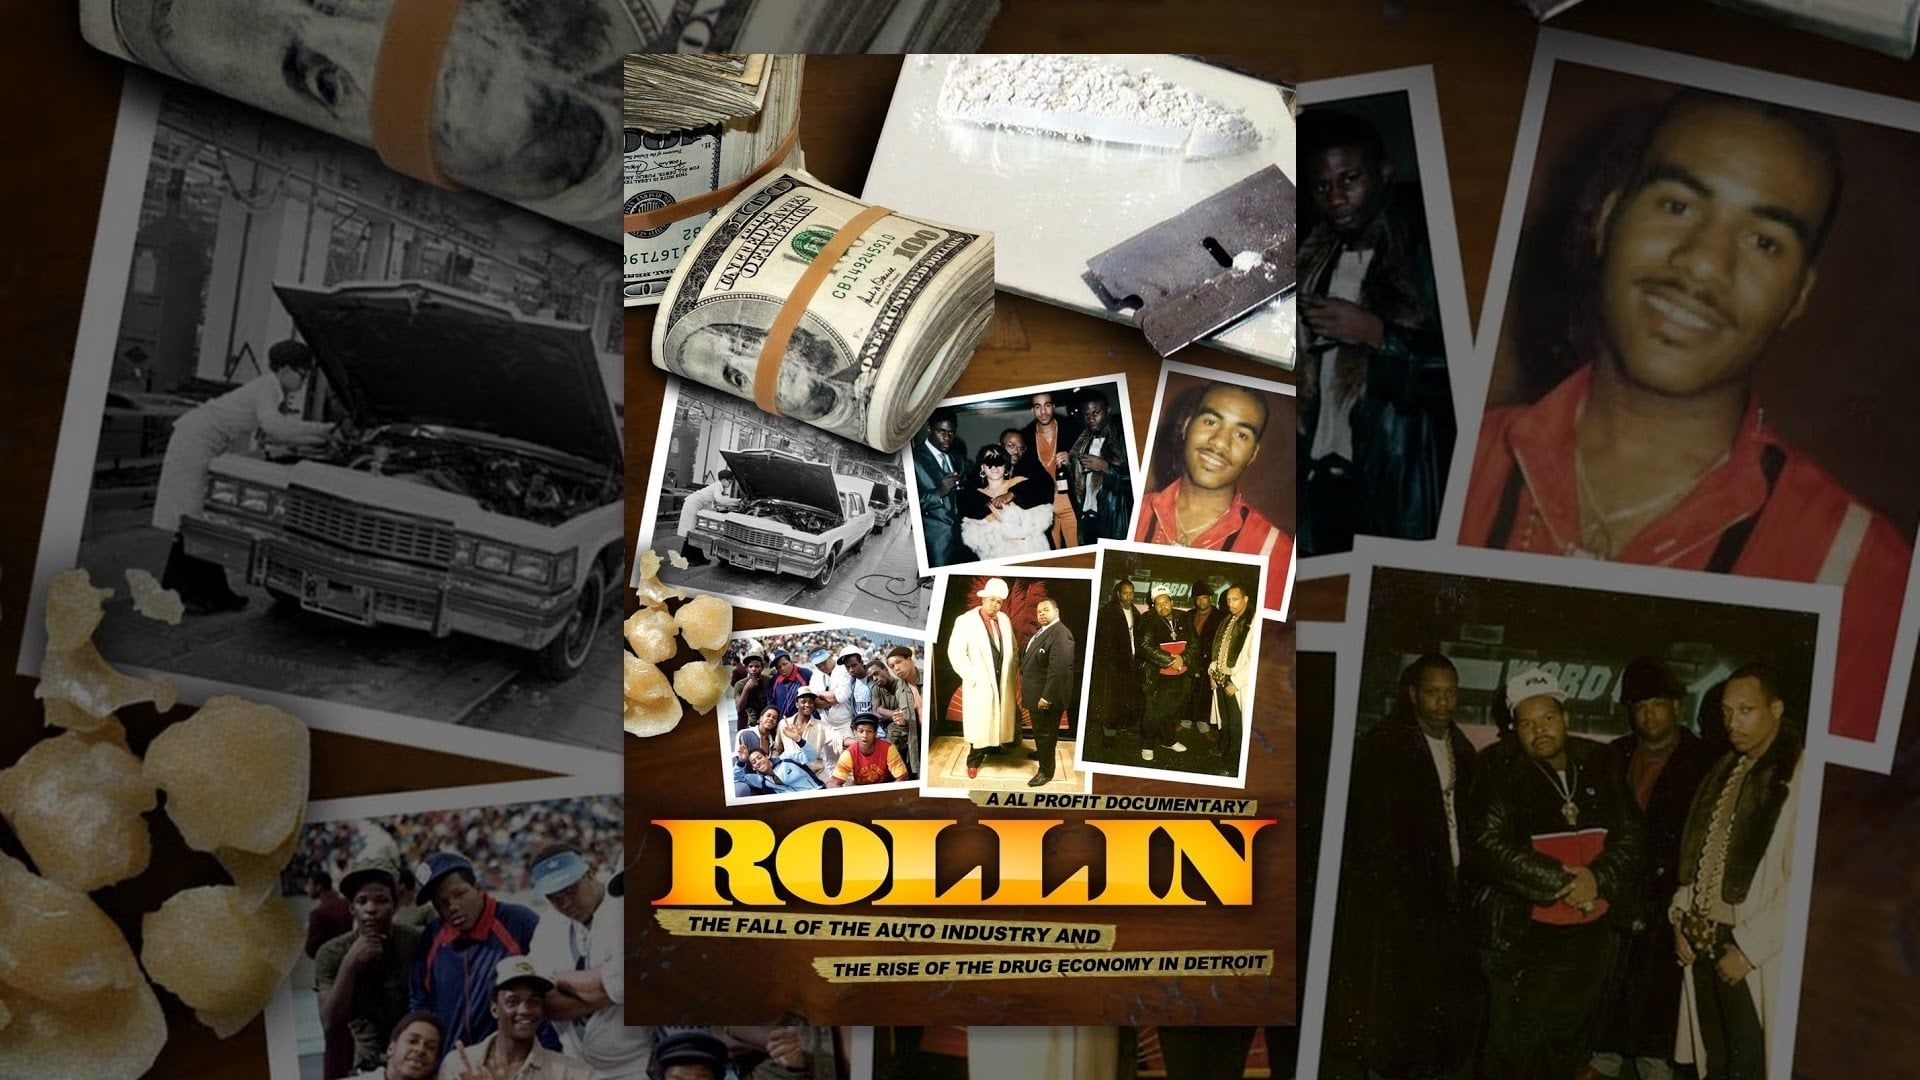 Rollin: The Decline of the Auto Industry and Rise of the Drug Economy in Detroit background